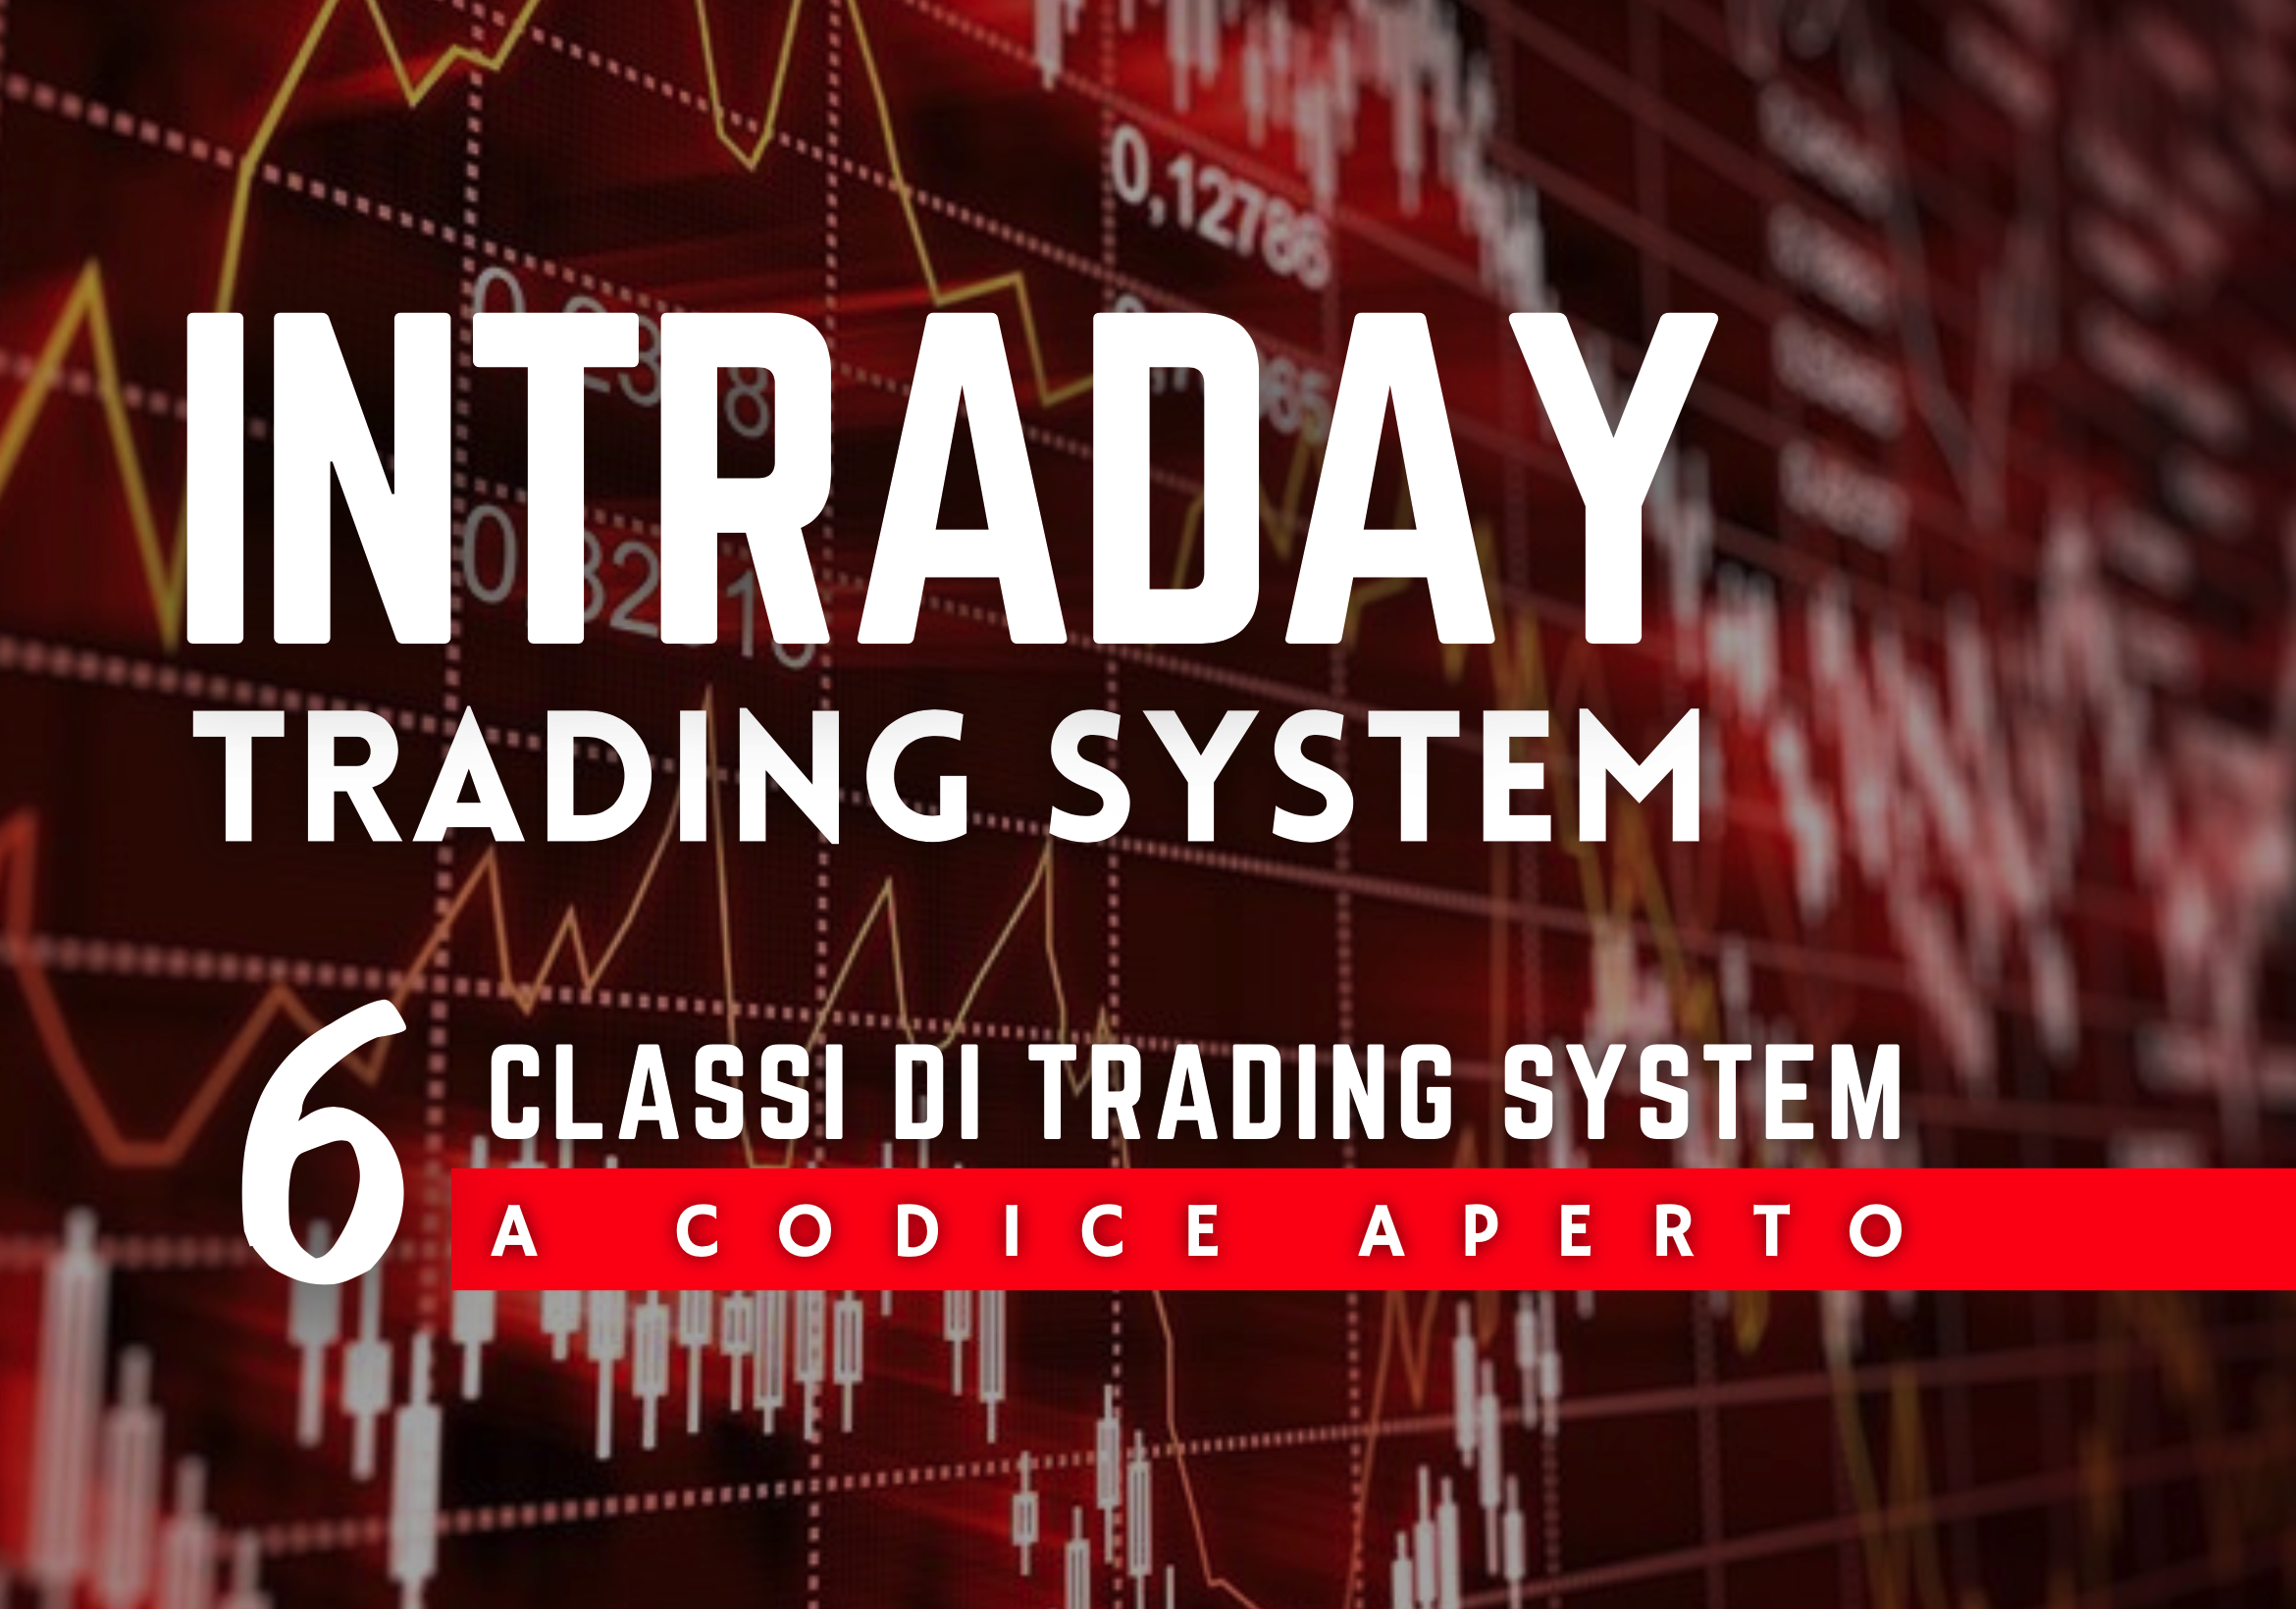 corso intraday trading system: strategie trading intraday, trading automatico, intraday trading futures 